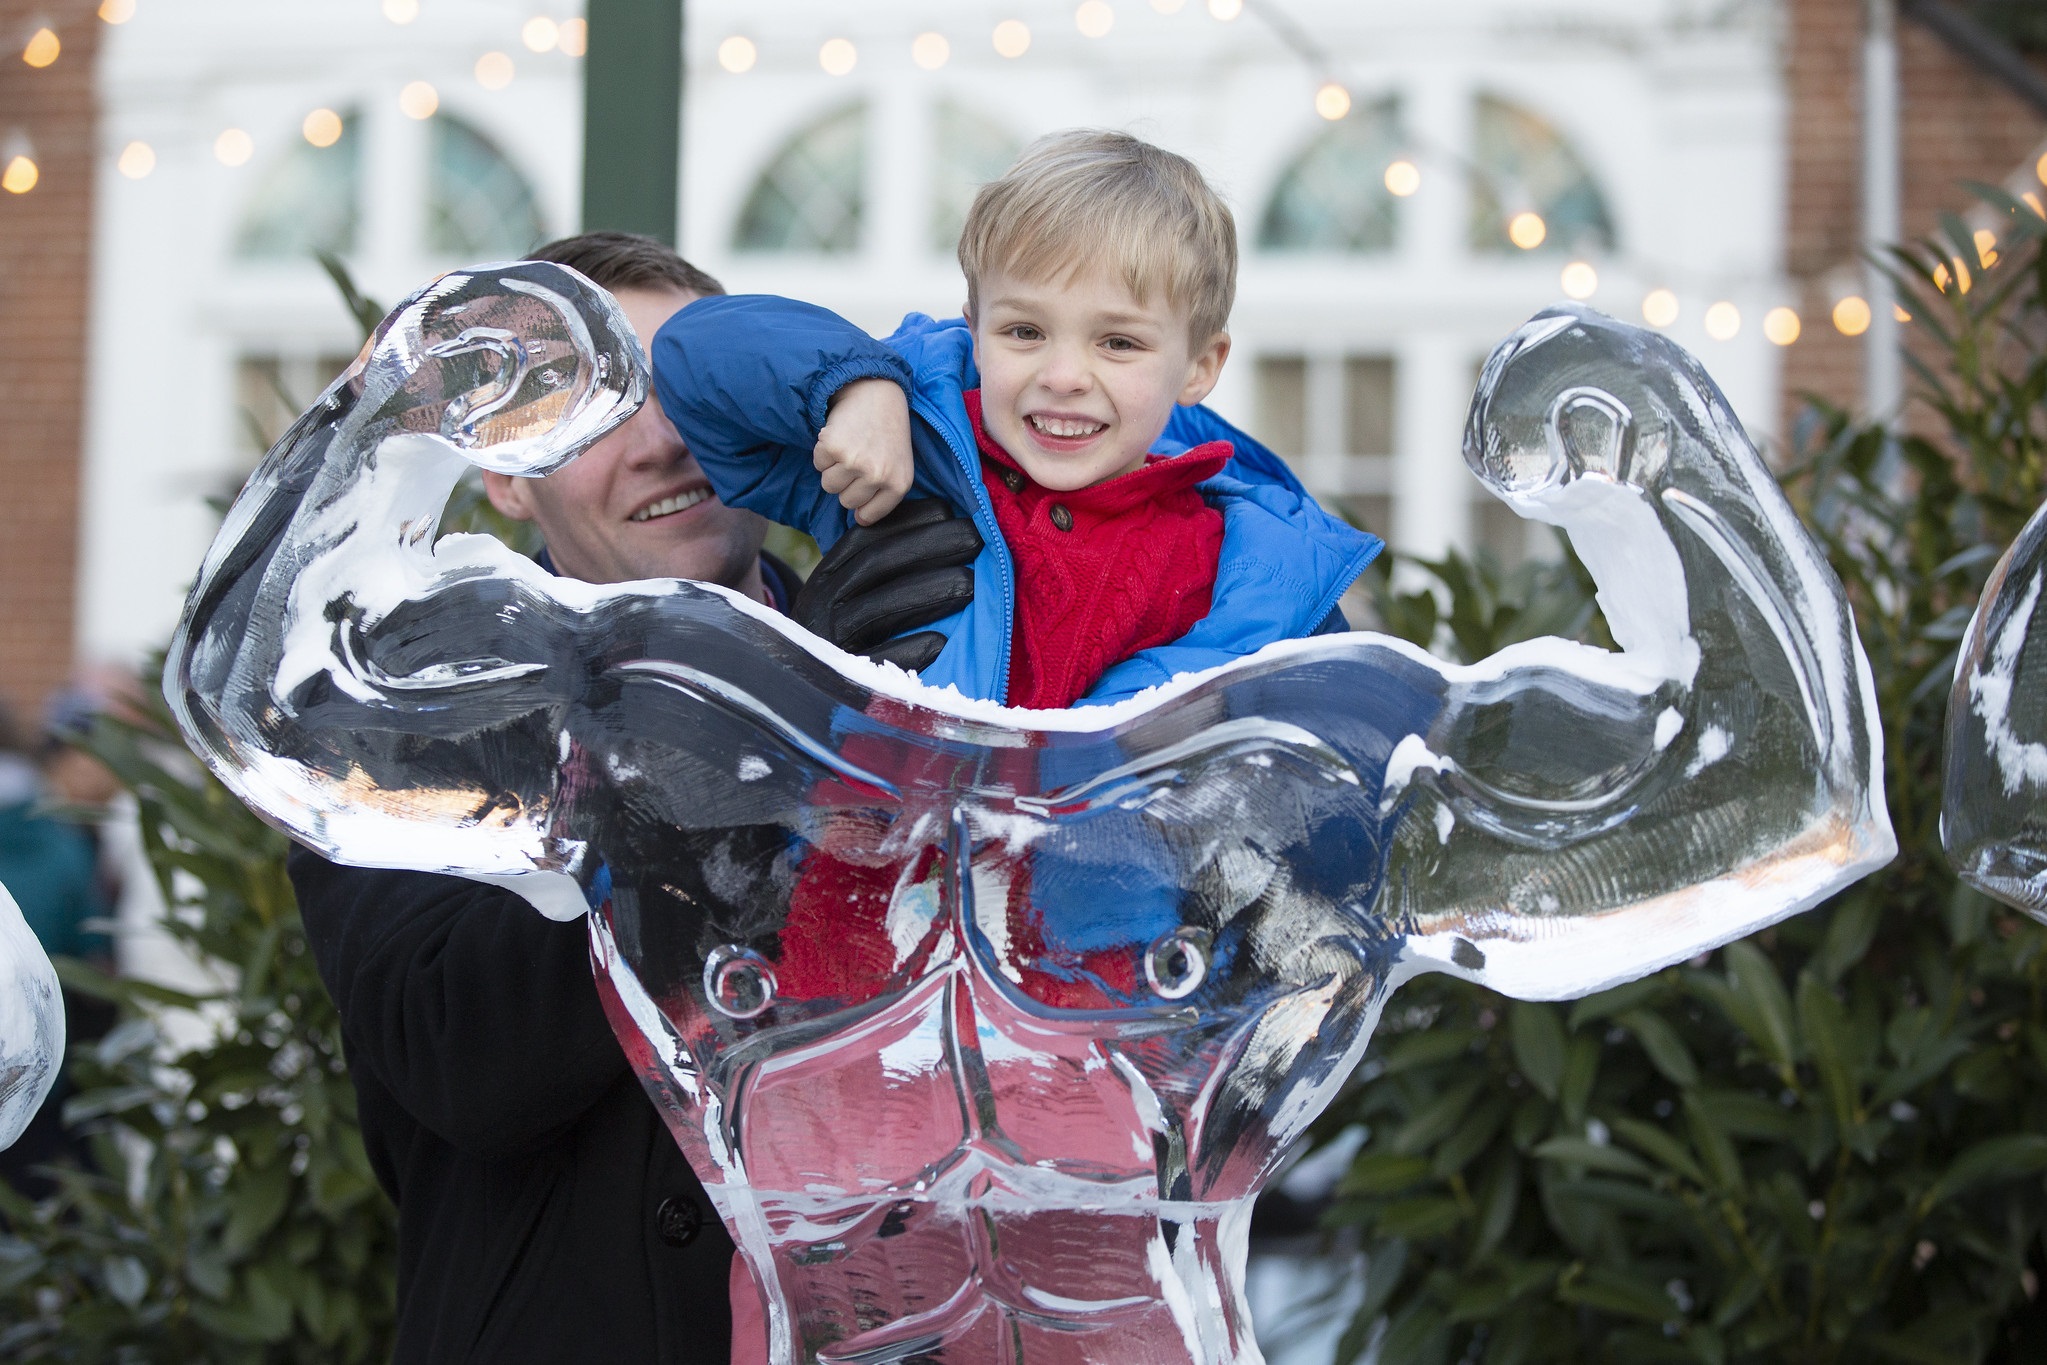 A man holds his five-year-old son up in front of an ice sculpture of a strongman making muscles at Lititz Fire and Ice on Feb. 14. The boy is smiling and wearing a sweater and coat. The man is smiling and wearing a coat and winter gloves.